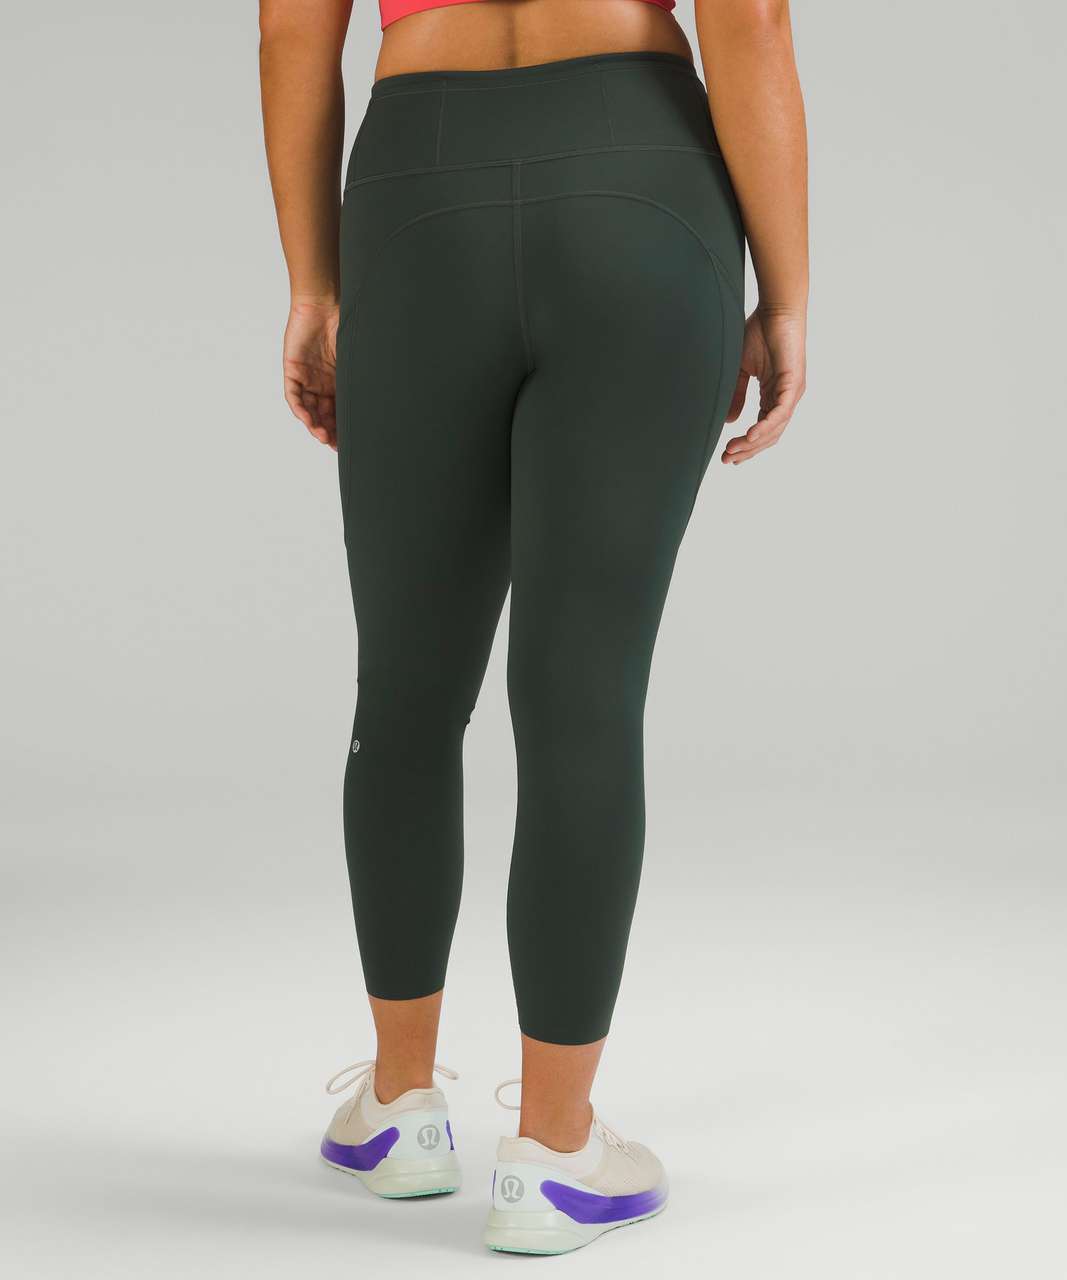 Lululemon Women's Fast Free High Rise Cropped 23/25 Tight